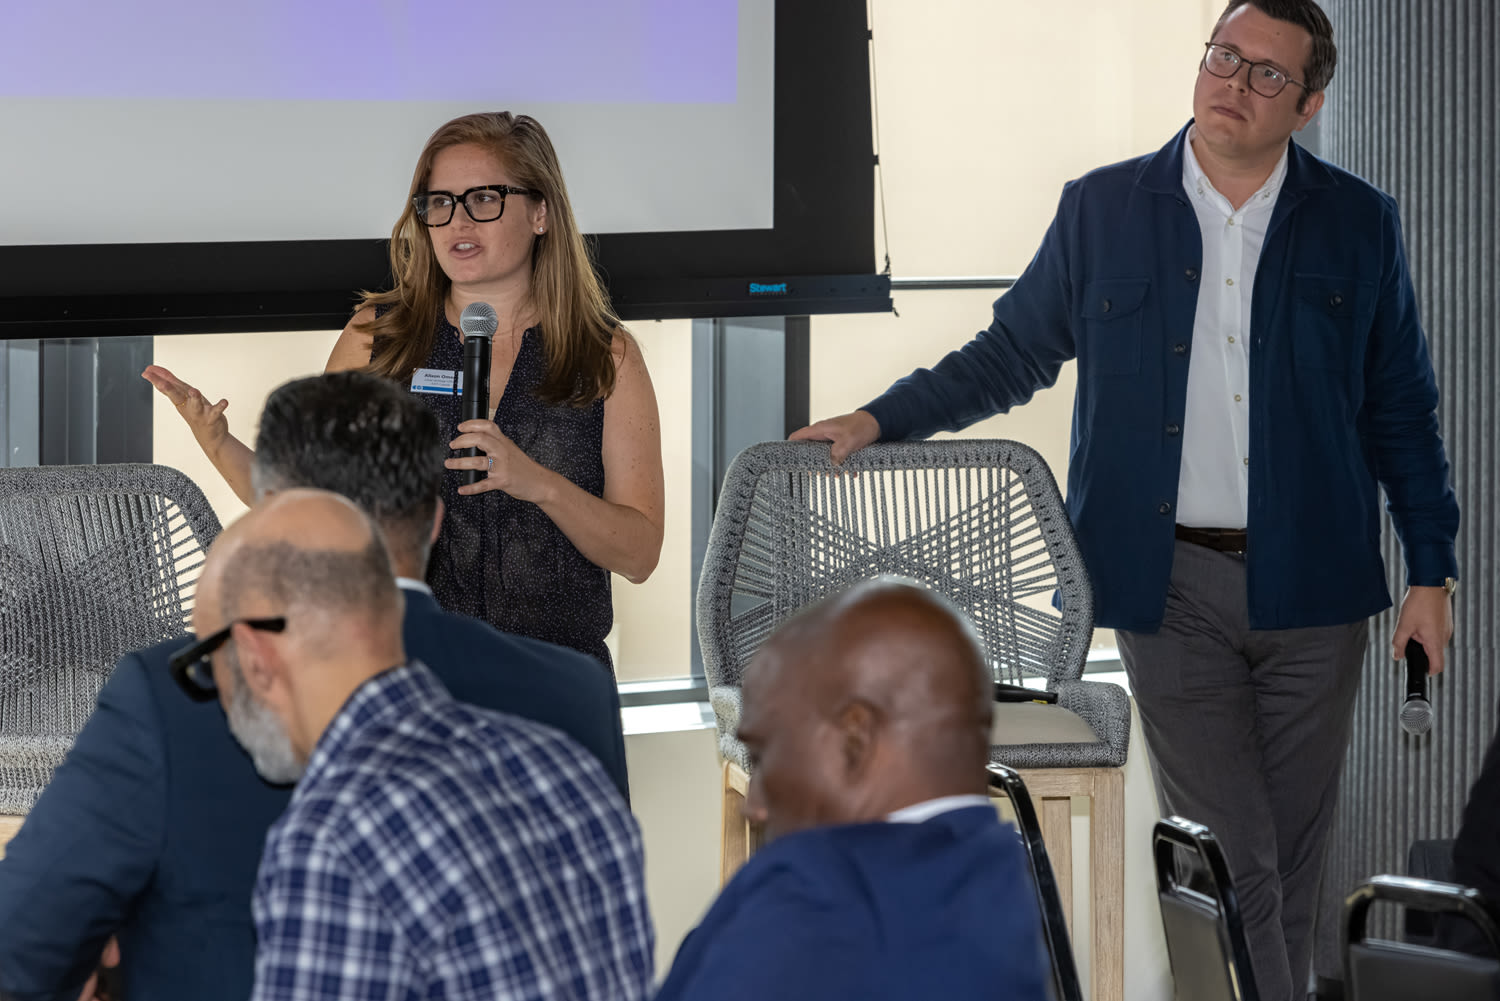 Alison Omens, President at JUST Capital and Tyler Spalding, Senior Director of Corporate Affairs & Global Head of Social Innovation at PayPal present at a 100% Human at Work gathering in New York | 100% Human at Work